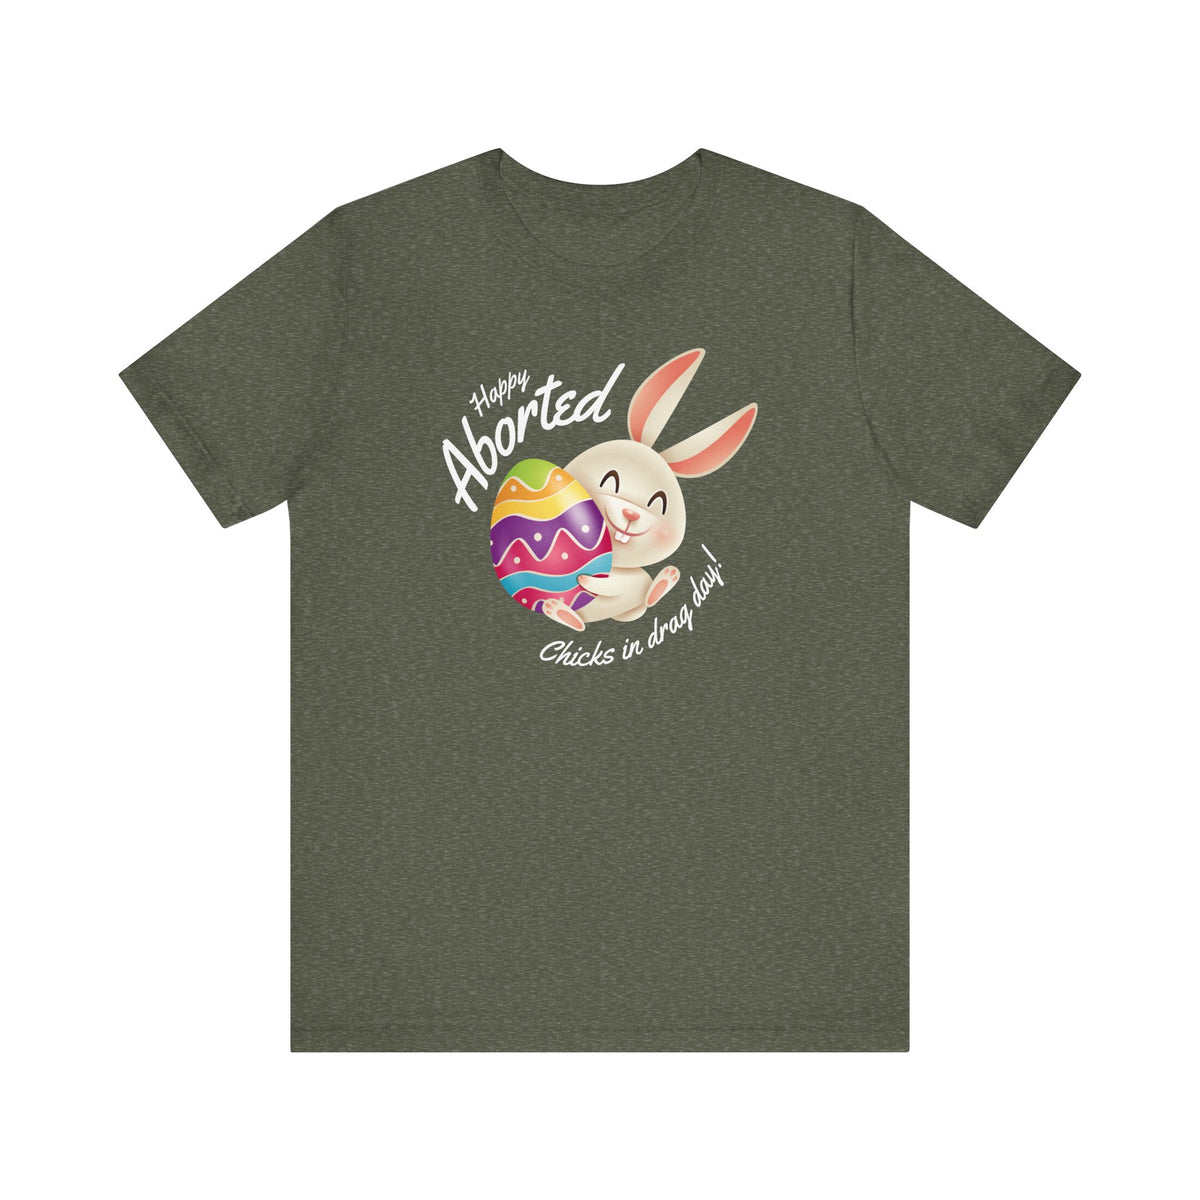 Irreverent Easter Tee Sure to Make Christians Clutch Their Pearls - Tee - Twisted Jezebel